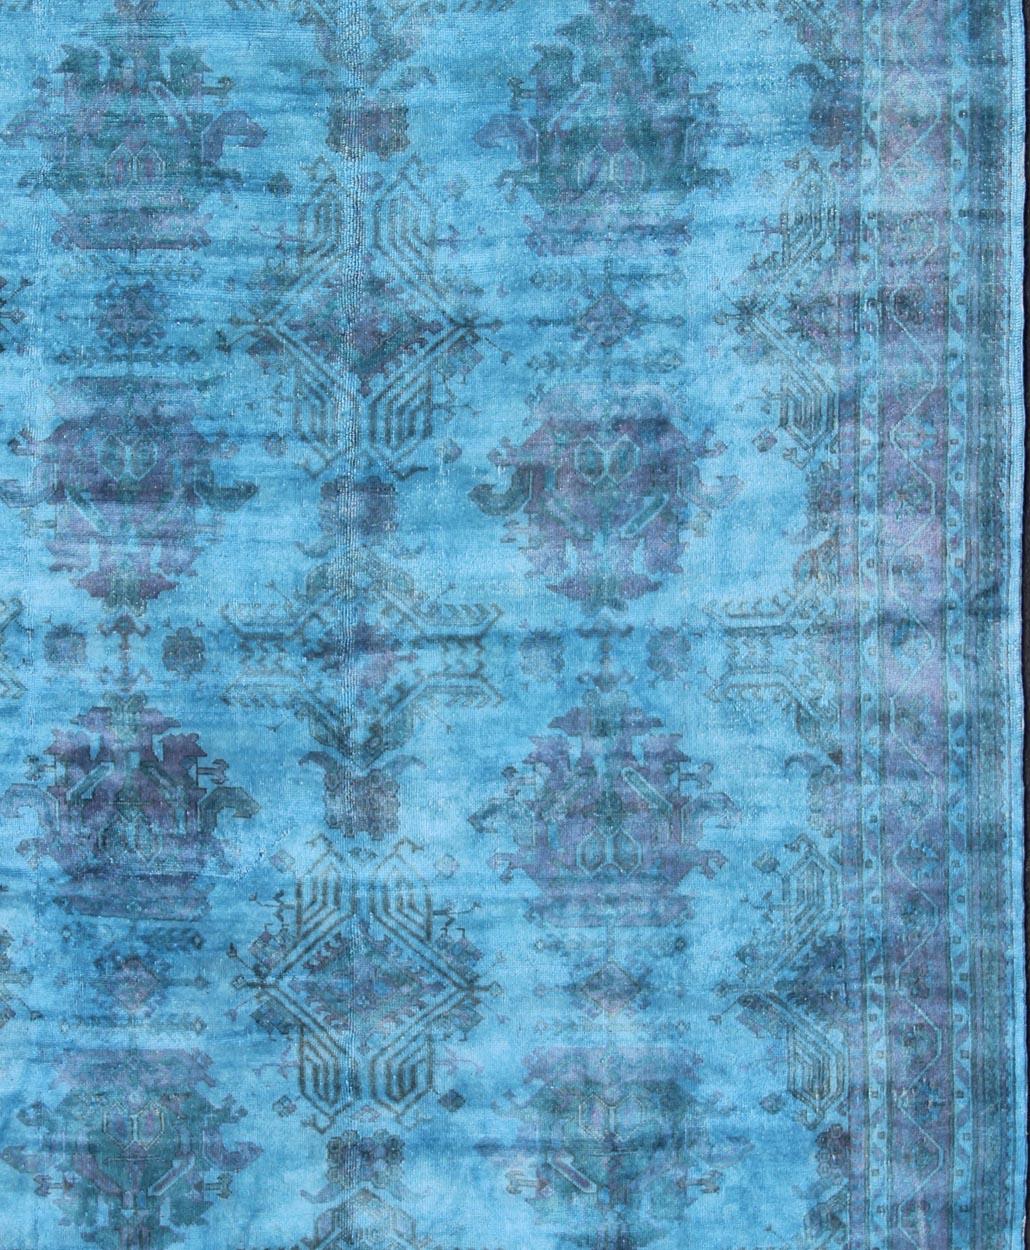 This vintage Turkish carpet with a classical composition has been overdyed with blue, light blue and pink pigments. With both classic and contemporary characteristics, this beautiful carpet could perfectly adorn a transitional or a contemporary